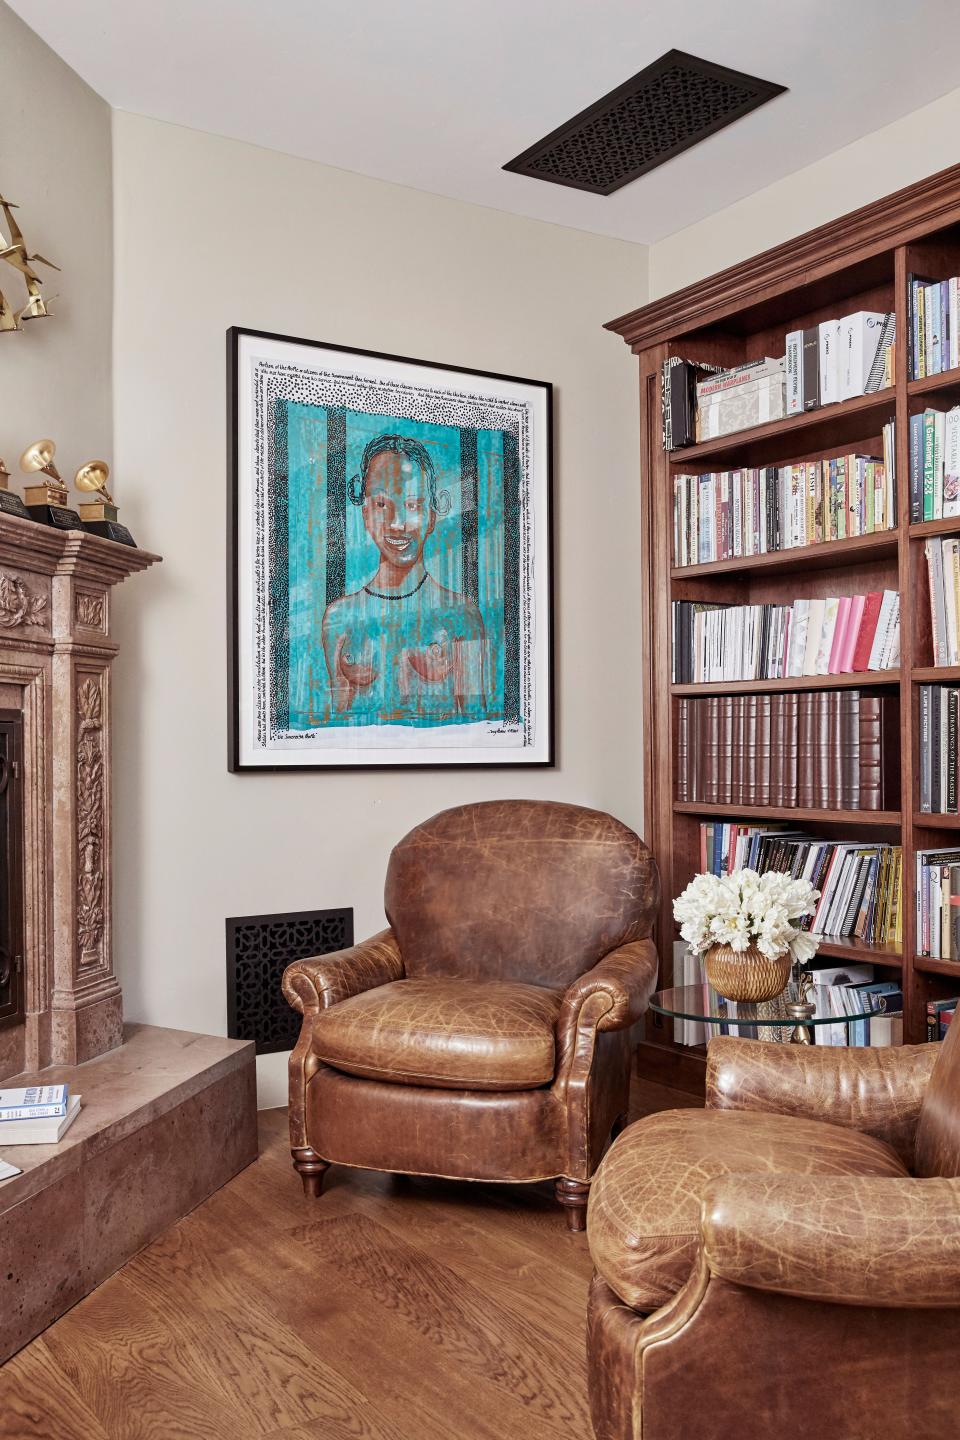 The library features a cozy nook with leather club chairs from Acquisitions by Henredon, custom-made cherry cabinets, and a hand-carved travertine fireplace. The art is The Sovereign People by Tony Ramos.